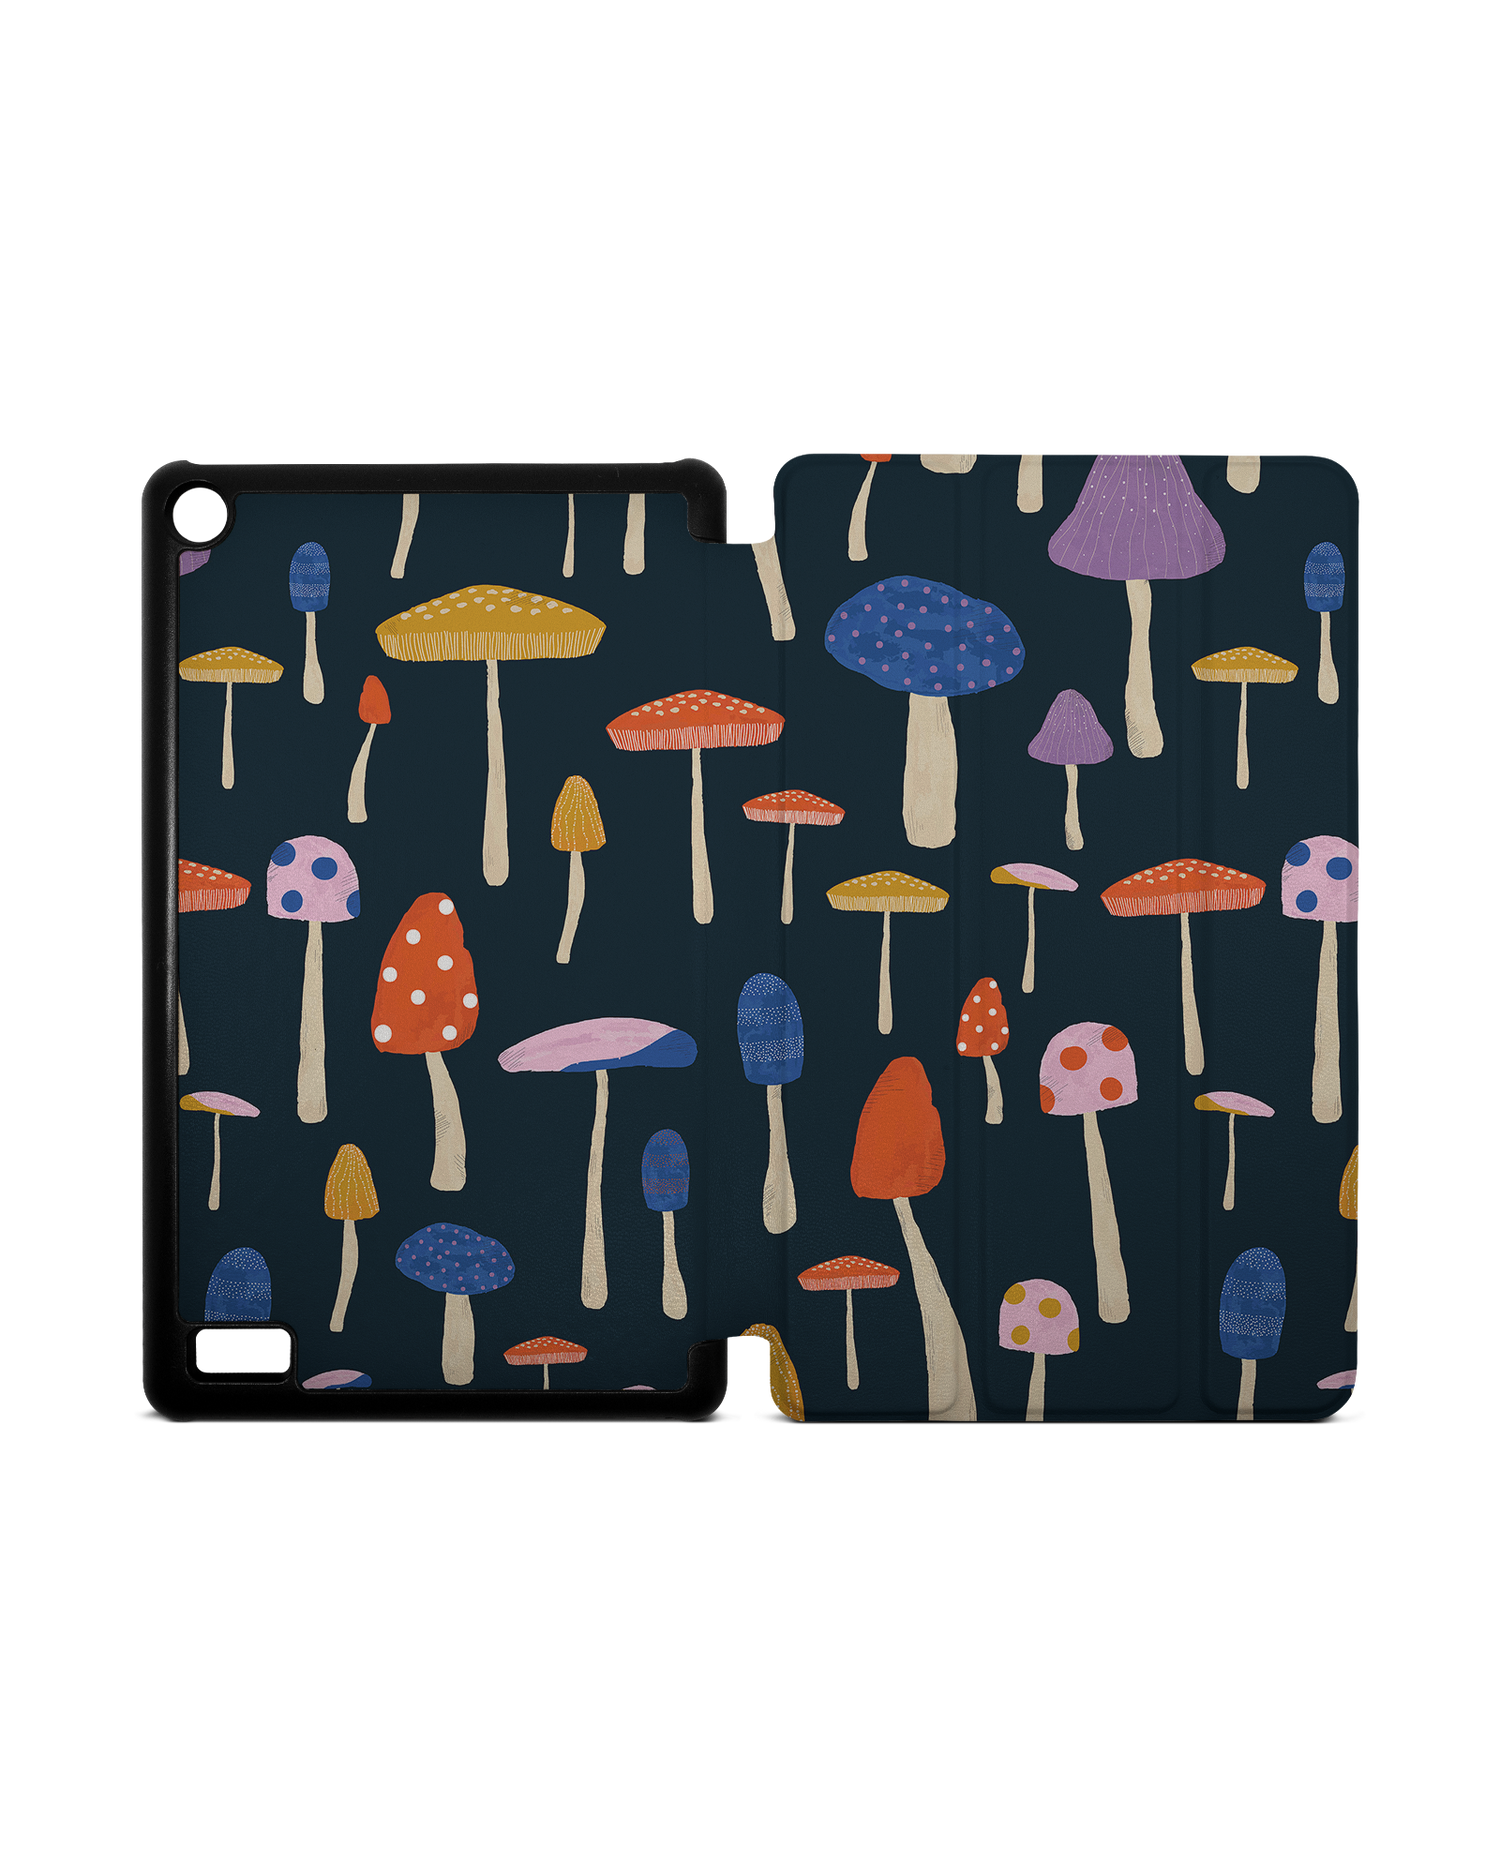 Mushroom Delights Tablet Smart Case for Amazon Fire 7: Opened